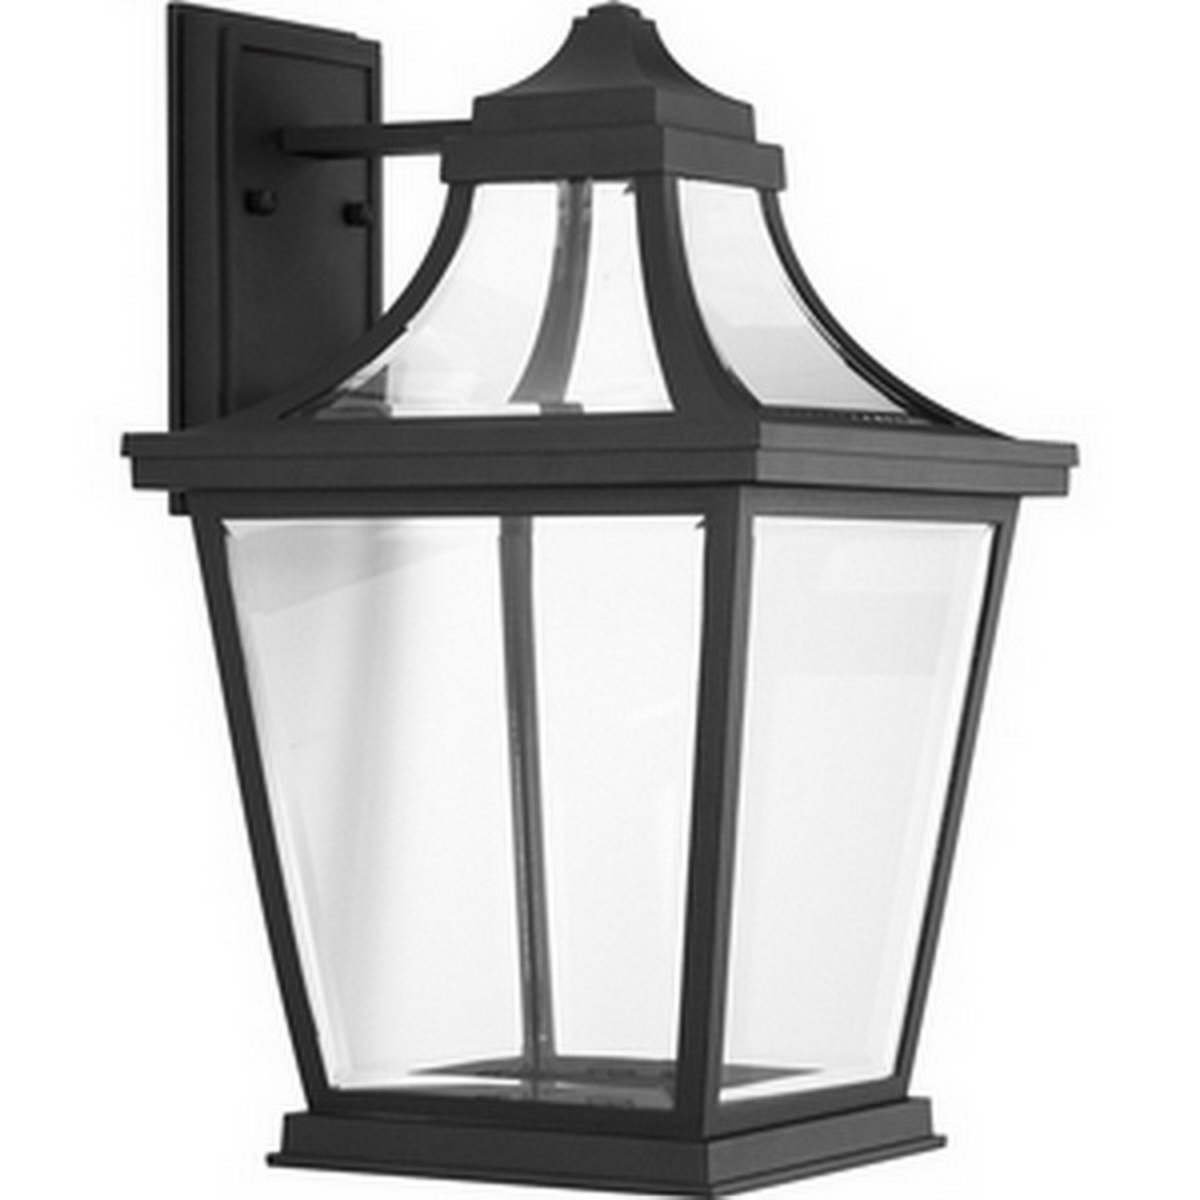 Endorse 18 in. LED Outdoor Wall Light 623 Lumens 3000K Black Finish